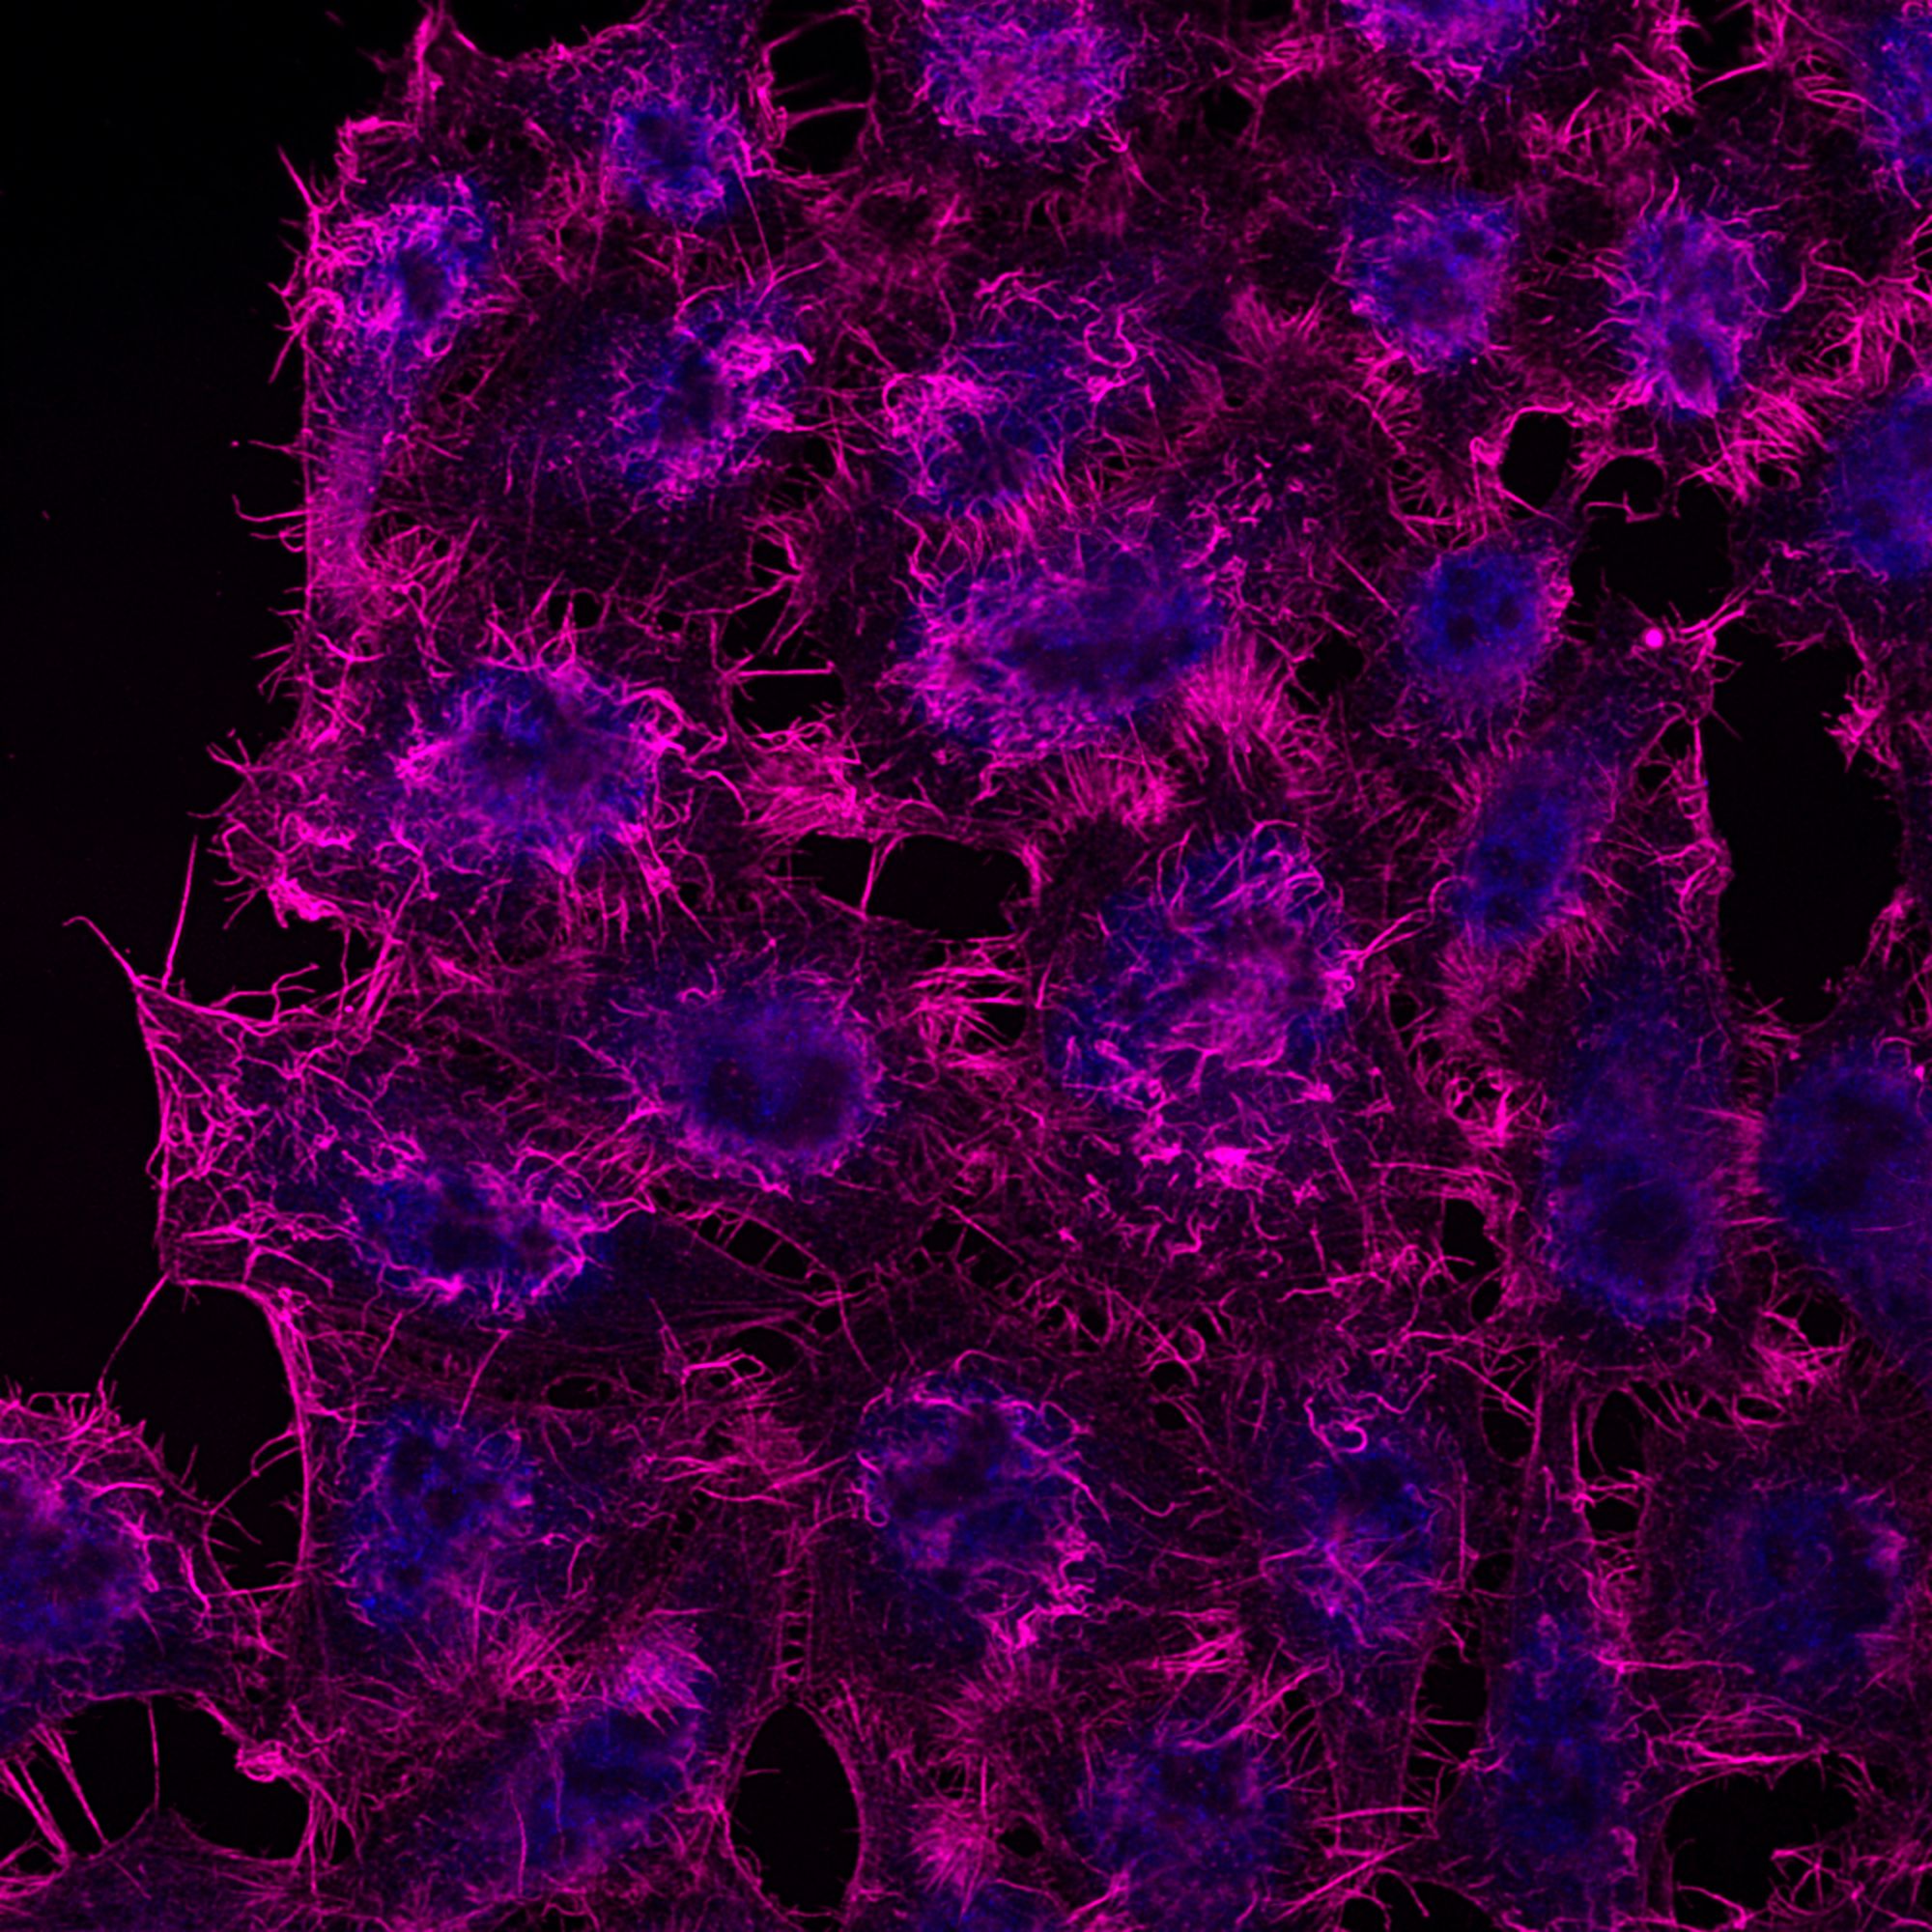 Immunofluorescence of HeLa: PFA-fixed HeLa cells were stained with anti-Actin labeled with FlexAble CoraLite® Plus 647 Kit (KFA043, magenta) and DAPI (blue). 
Confocal images were acquired with a 100x oil objective and post-processed. Images were recorded at the Core Facility Bioimaging at the Biomedical Center, LMU Munich.